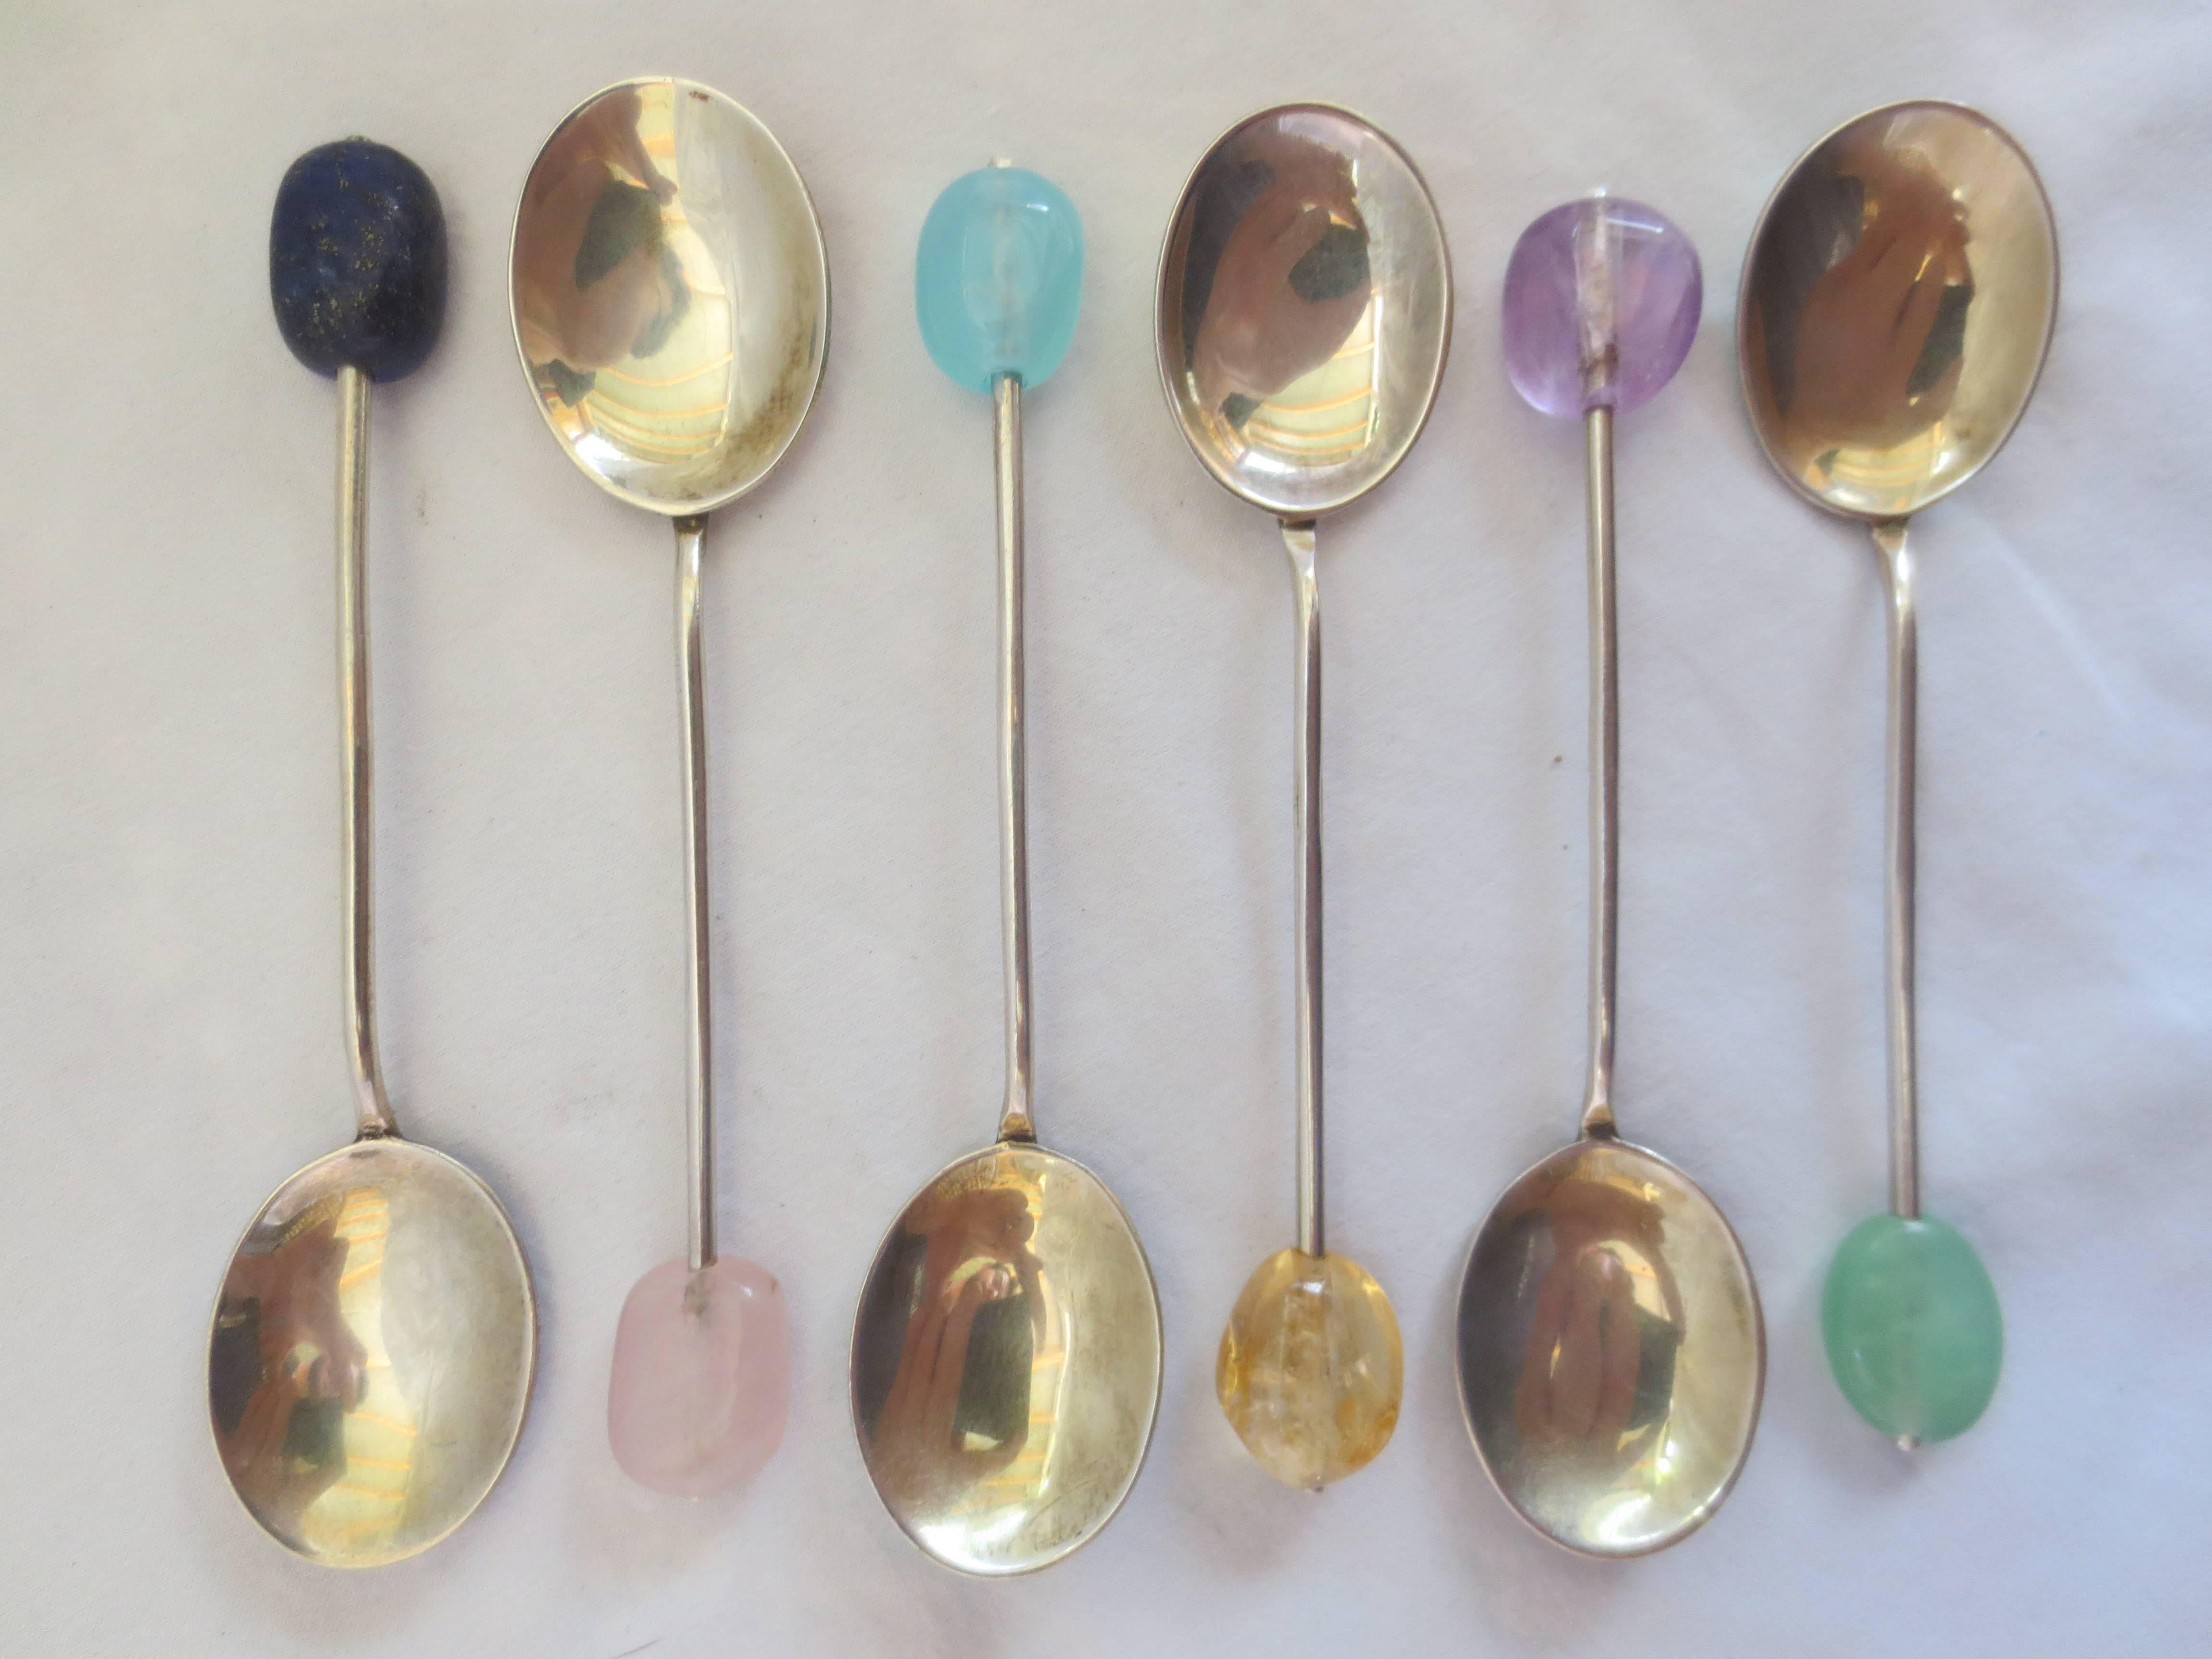 One-of-a-kind Enameled Silver Spoons Refurbished with Semi precious stone beads. 2